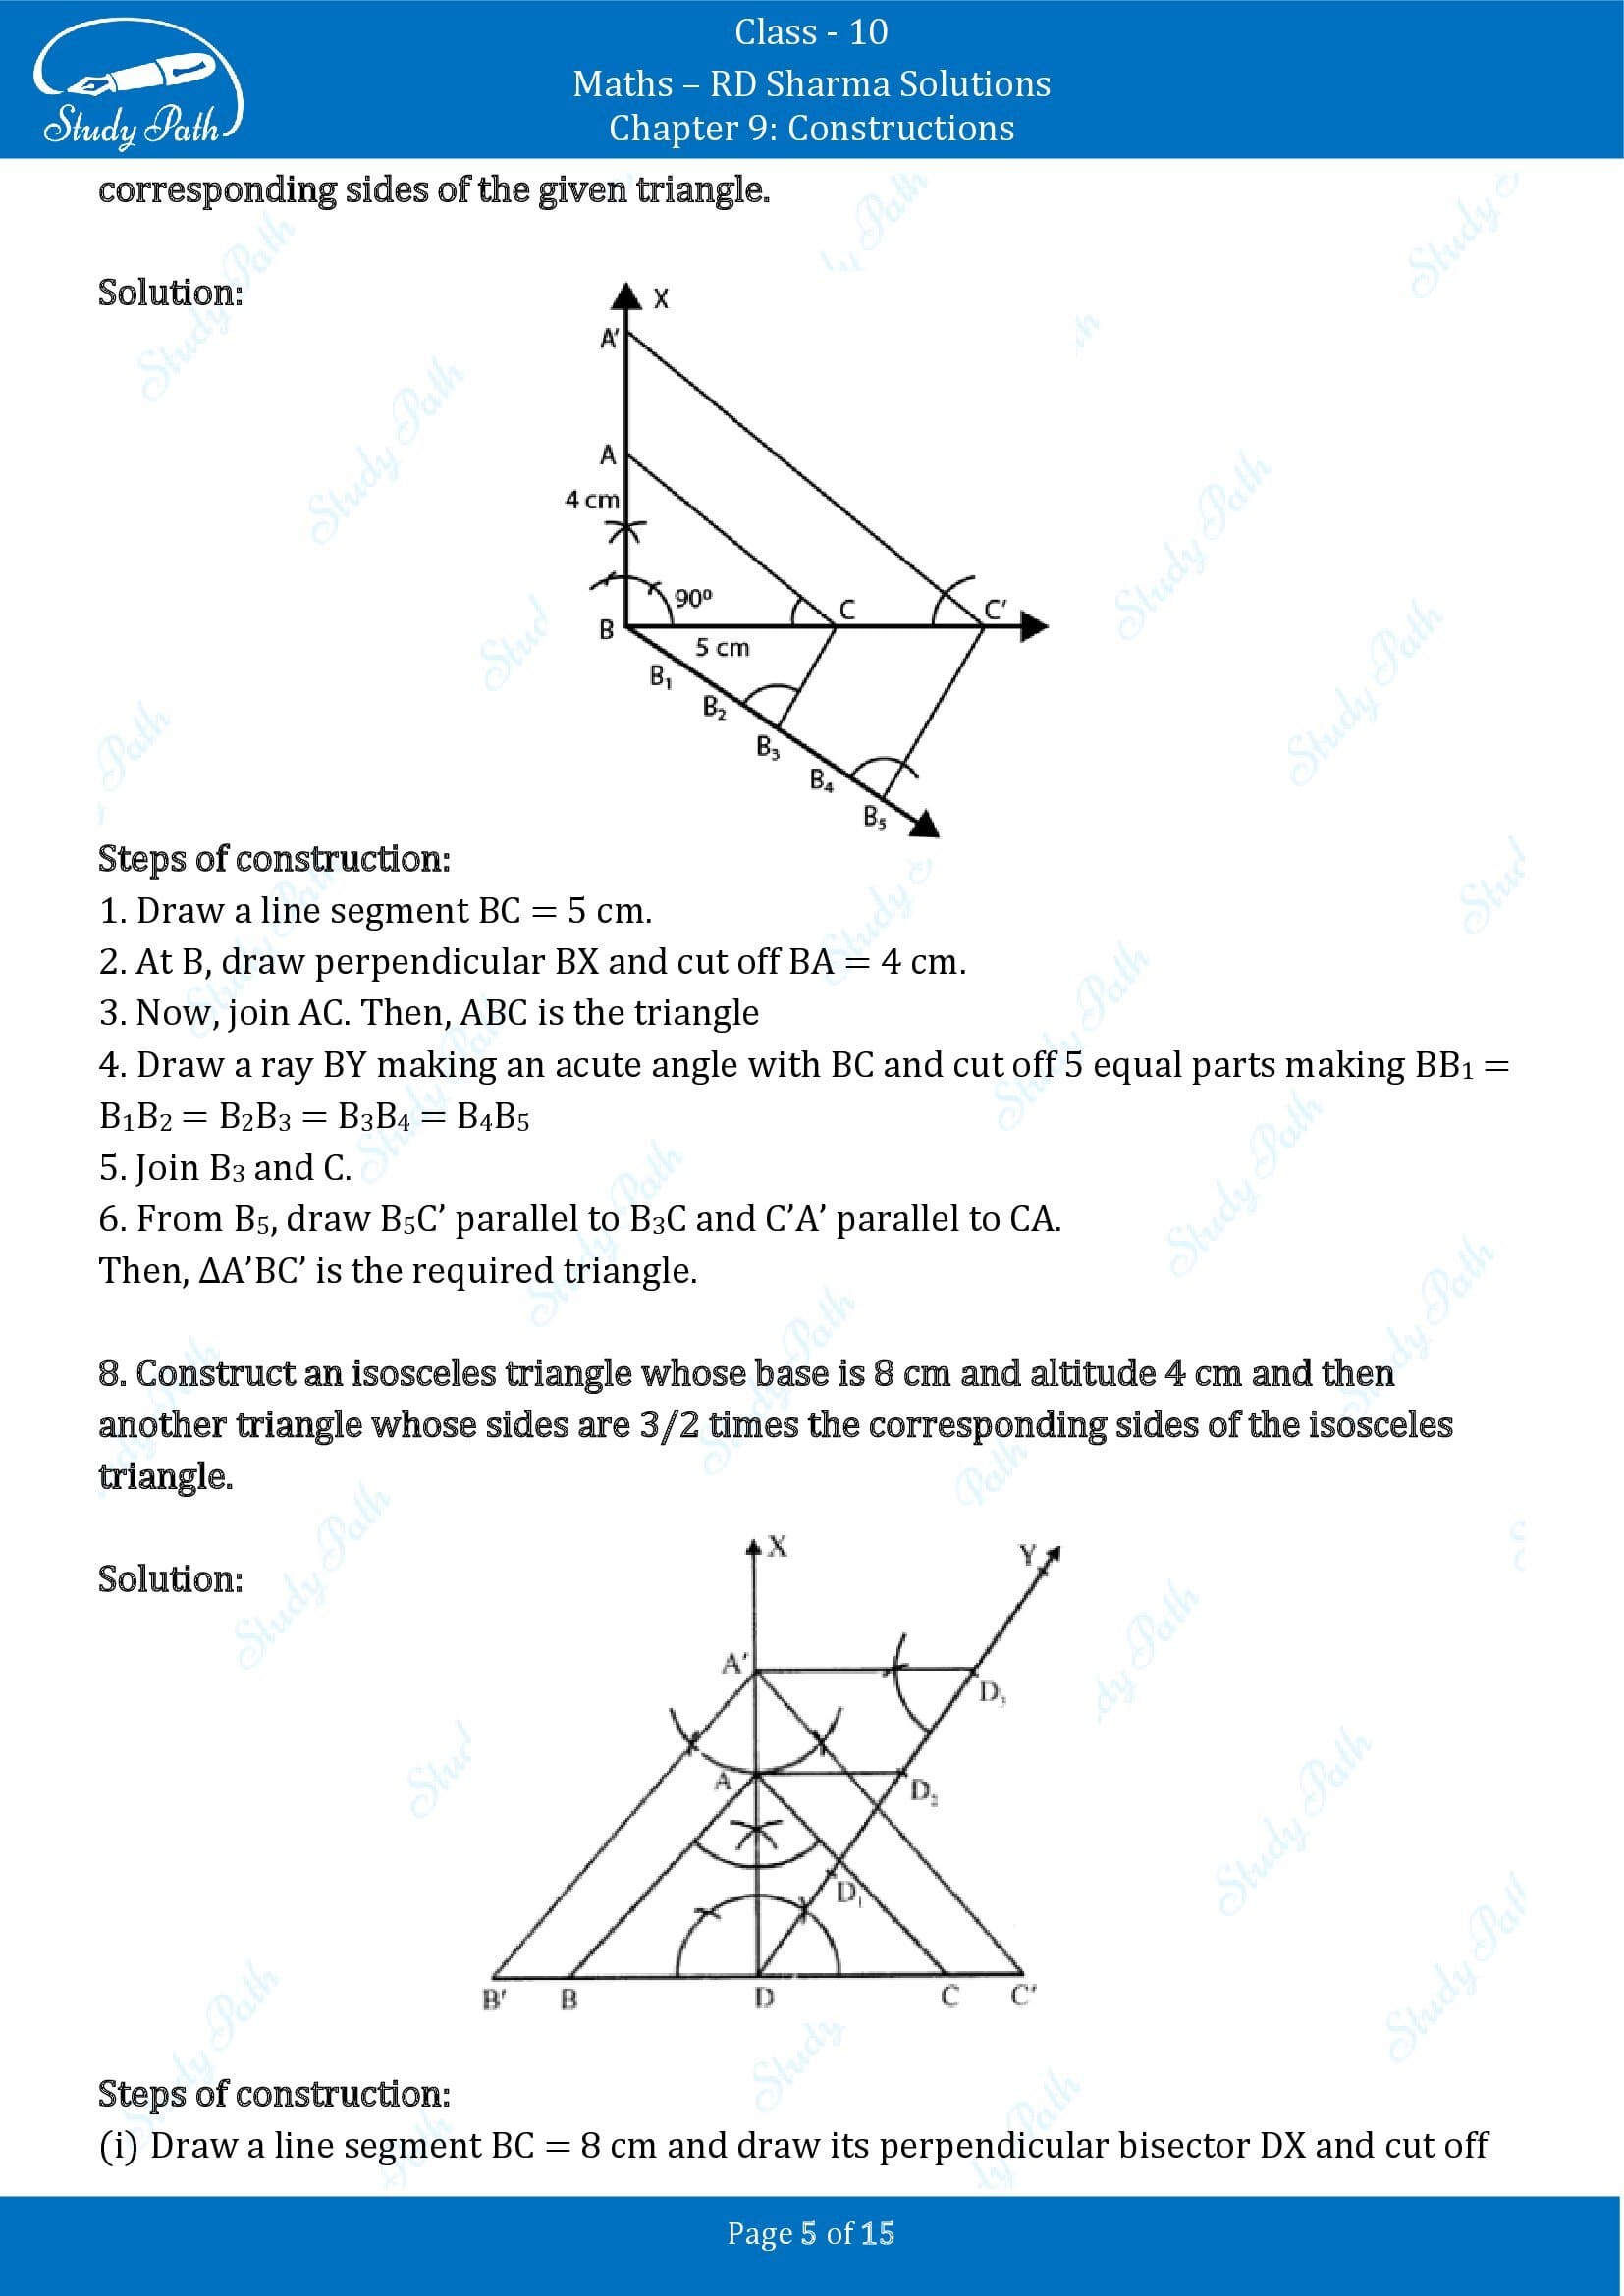 RD Sharma Solutions Class 10 Chapter 9 Constructions Exercise 9.2 00005